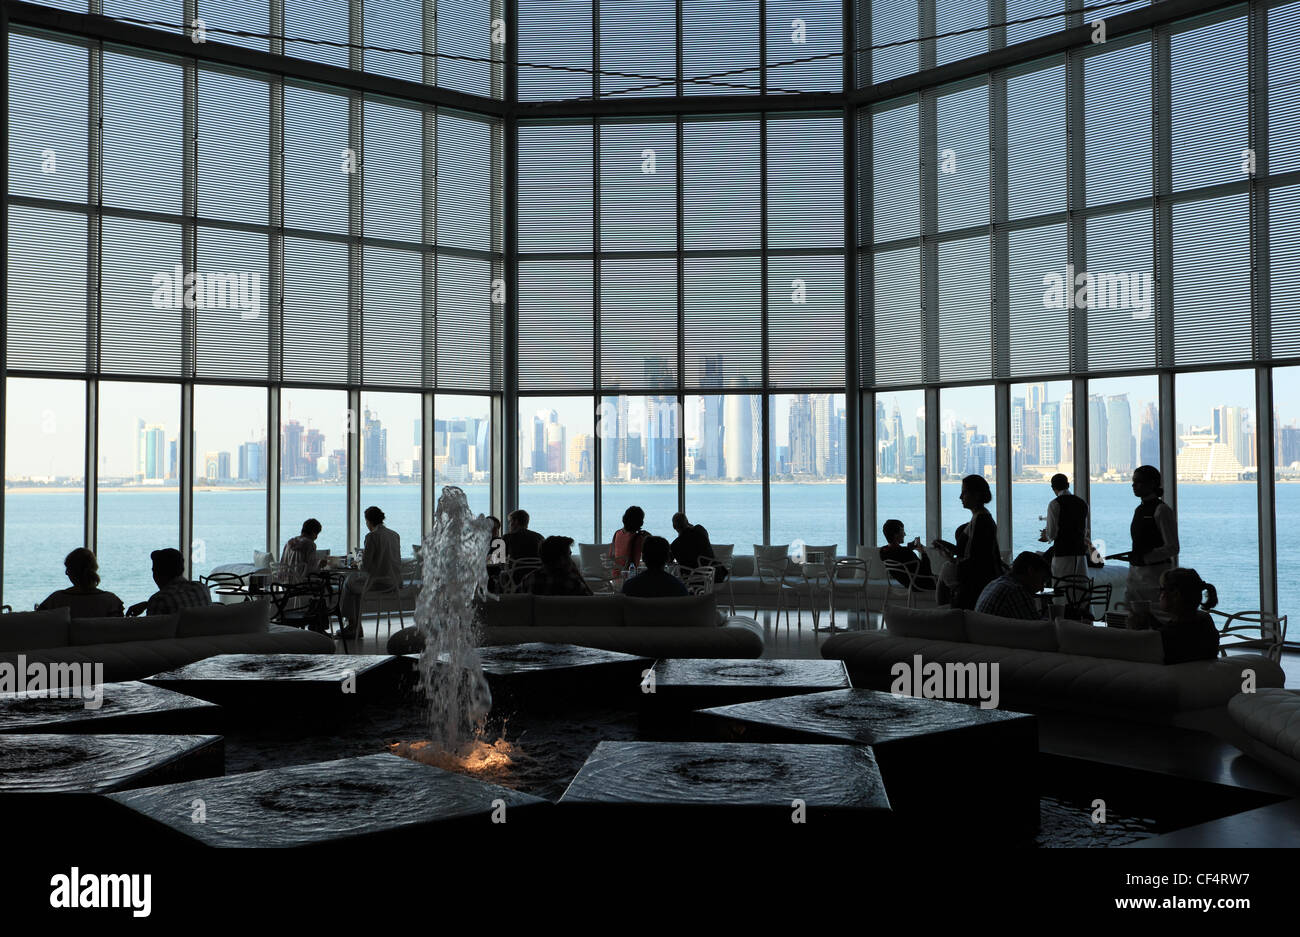 Cafe inside of the Museum of Islamic Art in Doha, Qatar Stock Photo